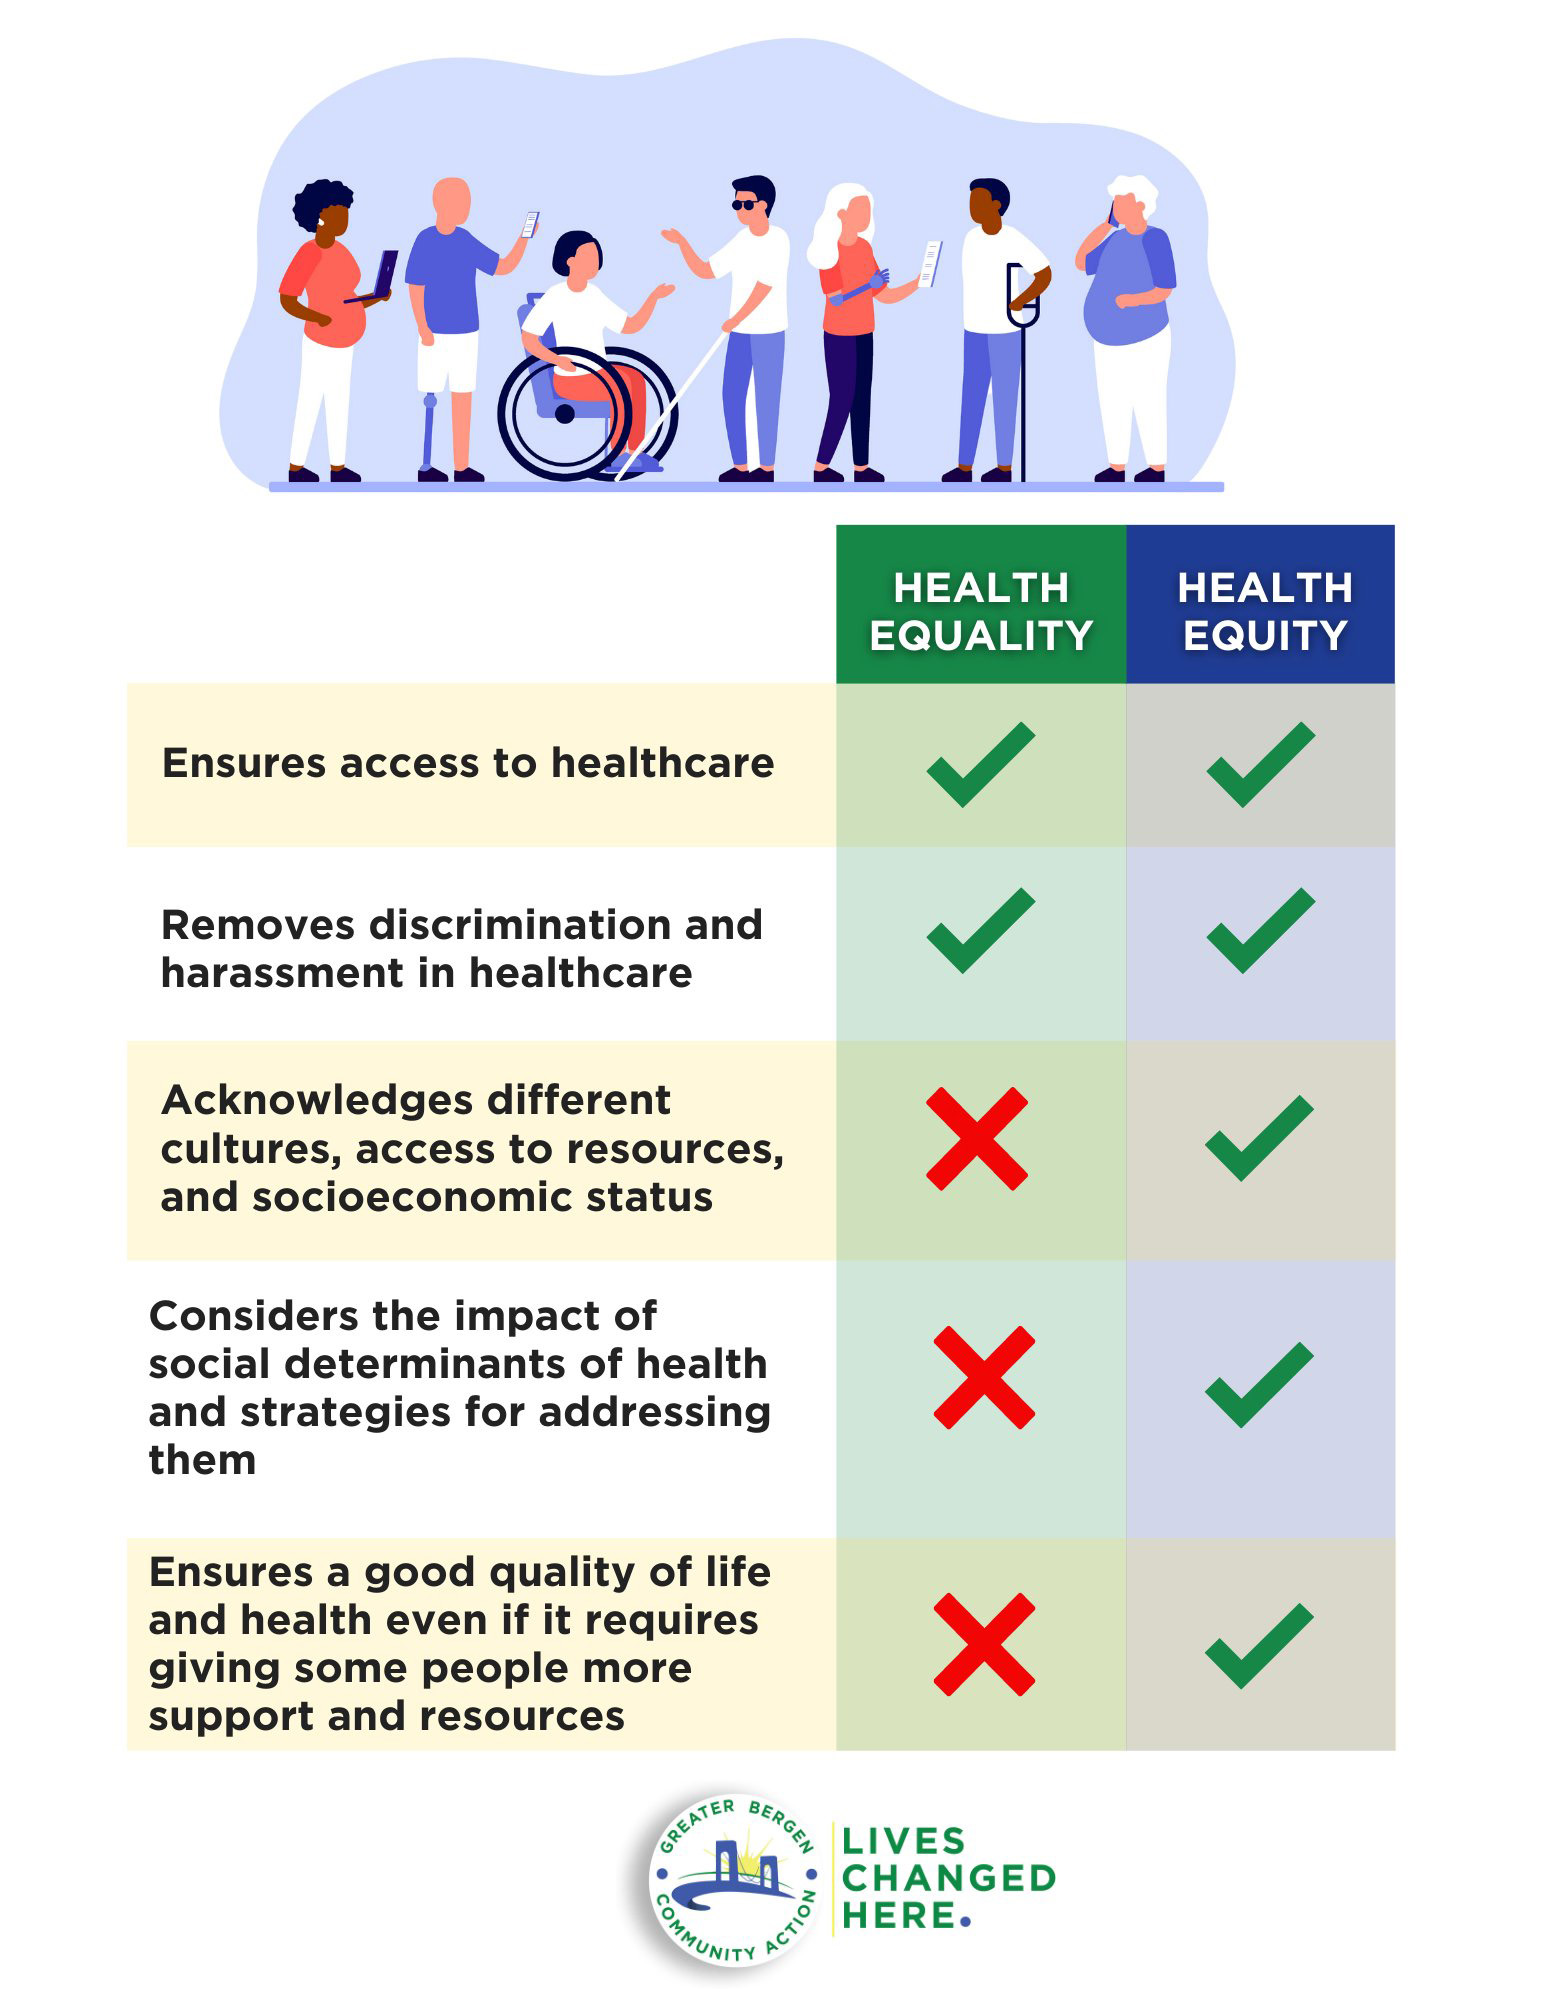 Health Equity vs. Health Equality: What's the Difference? (c) Greater Bergen Community Action